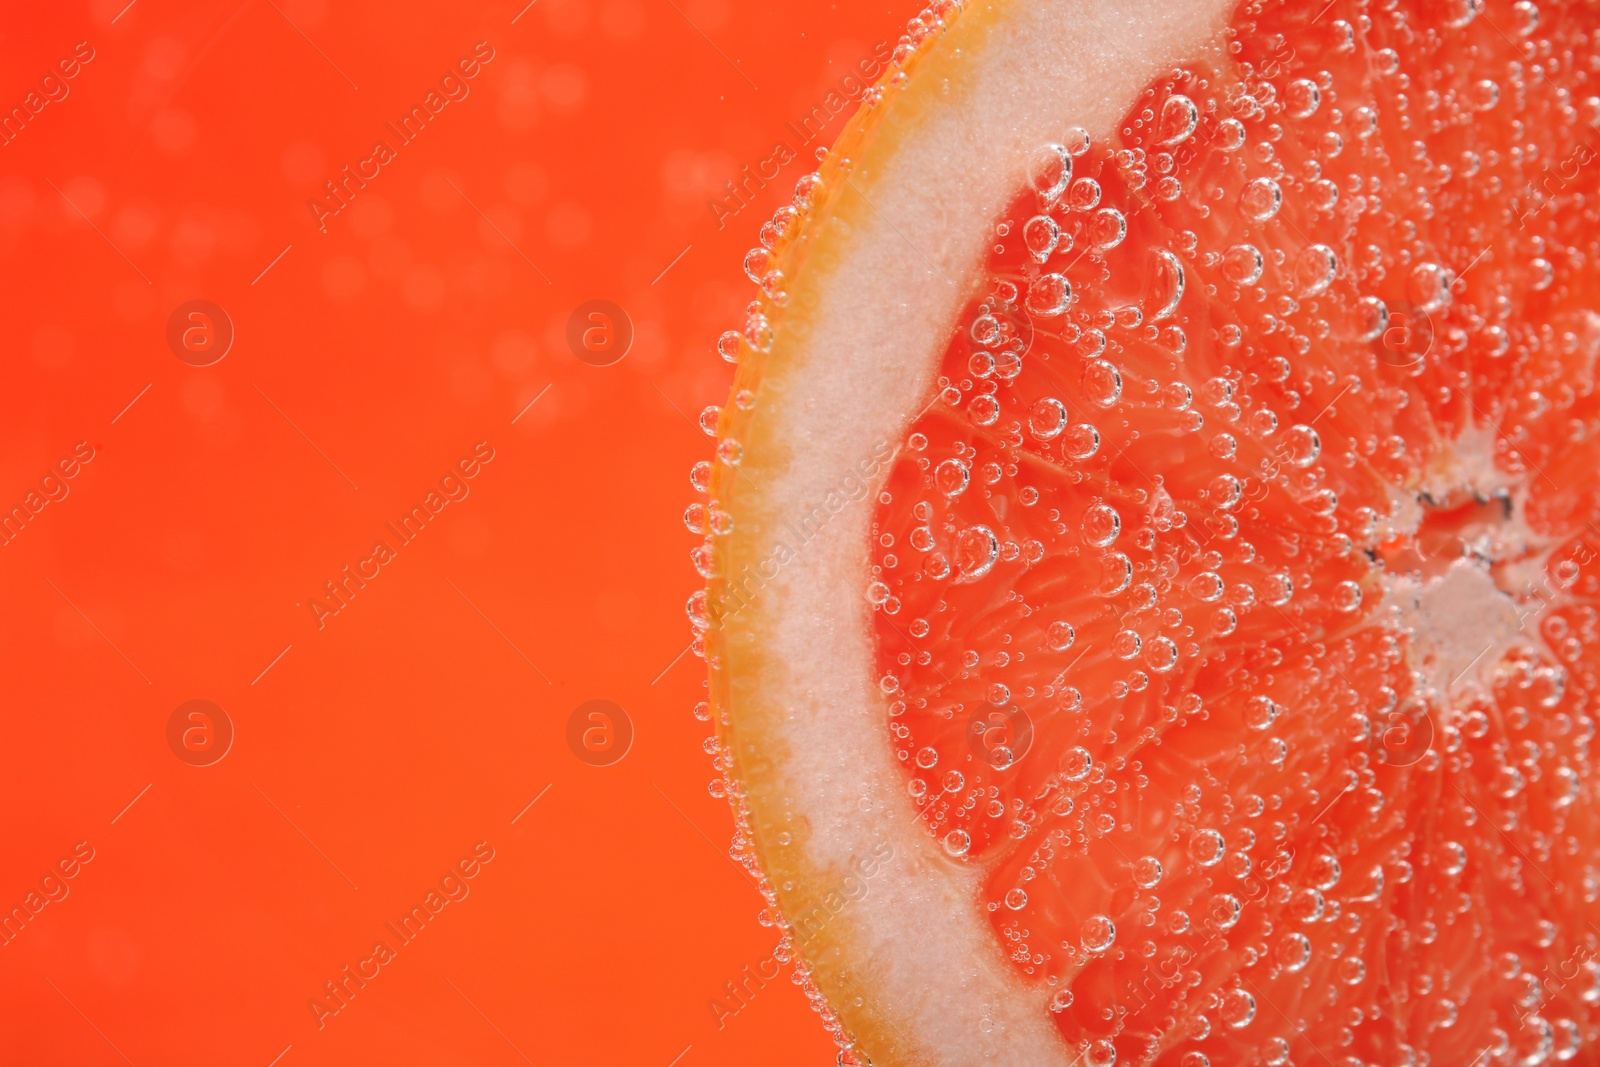 Photo of Slice of grapefruit in sparkling water on orange background, closeup with space for text. Citrus soda